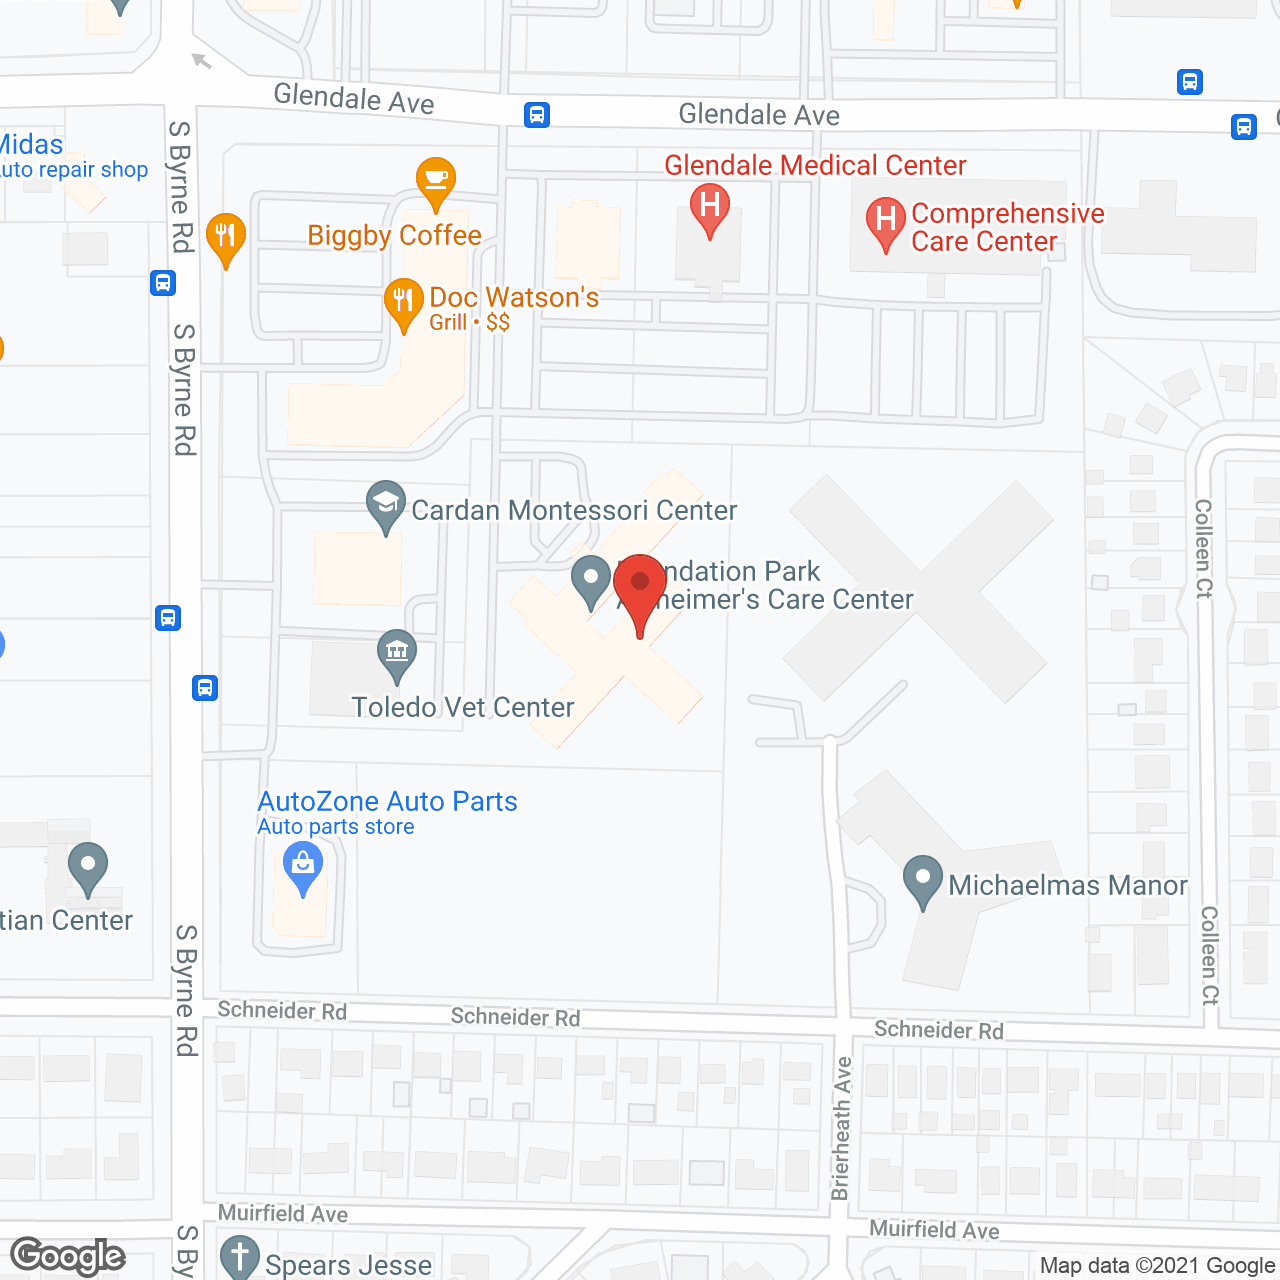 Foundation Park Care Center in google map